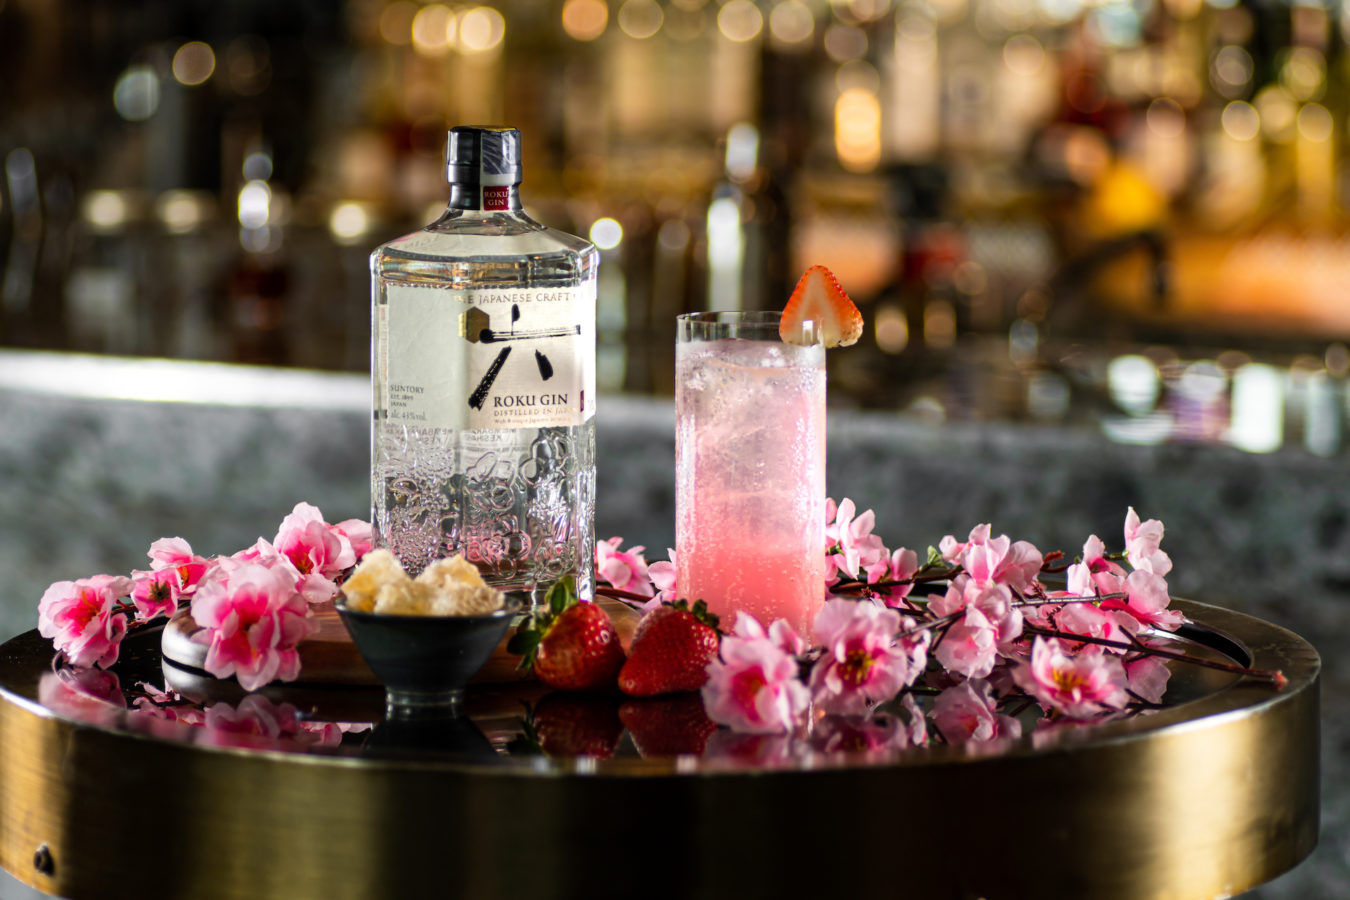 Celebrate the spirit of spring with Roku Gin at these ten cocktail bars and restaurants in KL